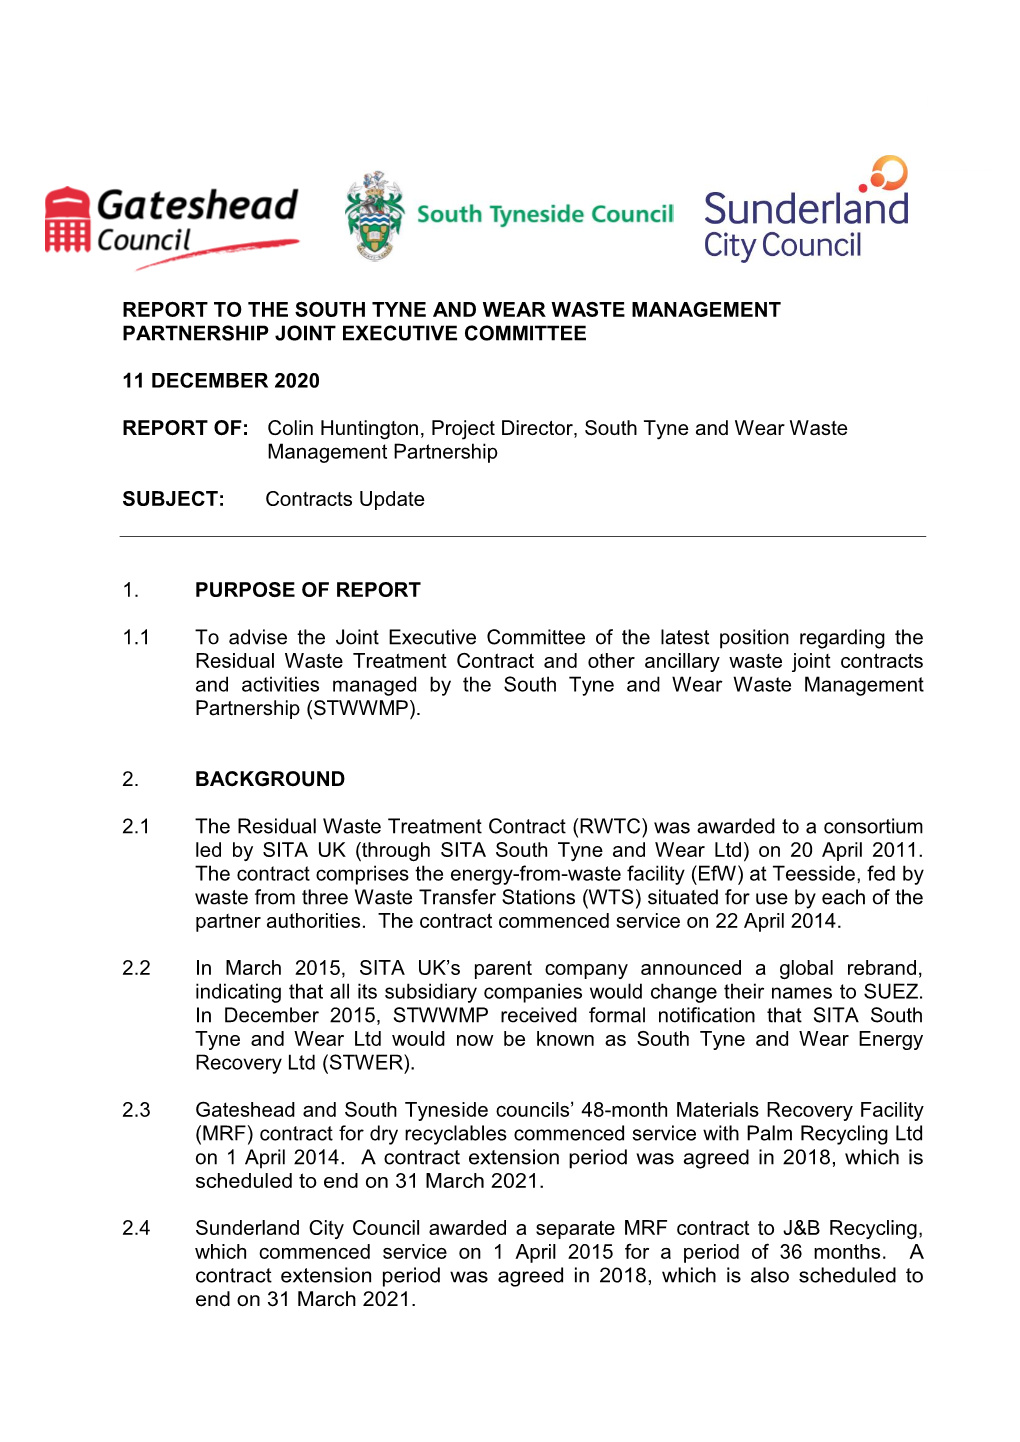 REPORT to the SOUTH TYNE and WEAR WASTE MANAGEMENT PARTNERSHIP JOINT EXECUTIVE COMMITTEE 11 DECEMBER 2020 REPORT OF: Colin Hunt